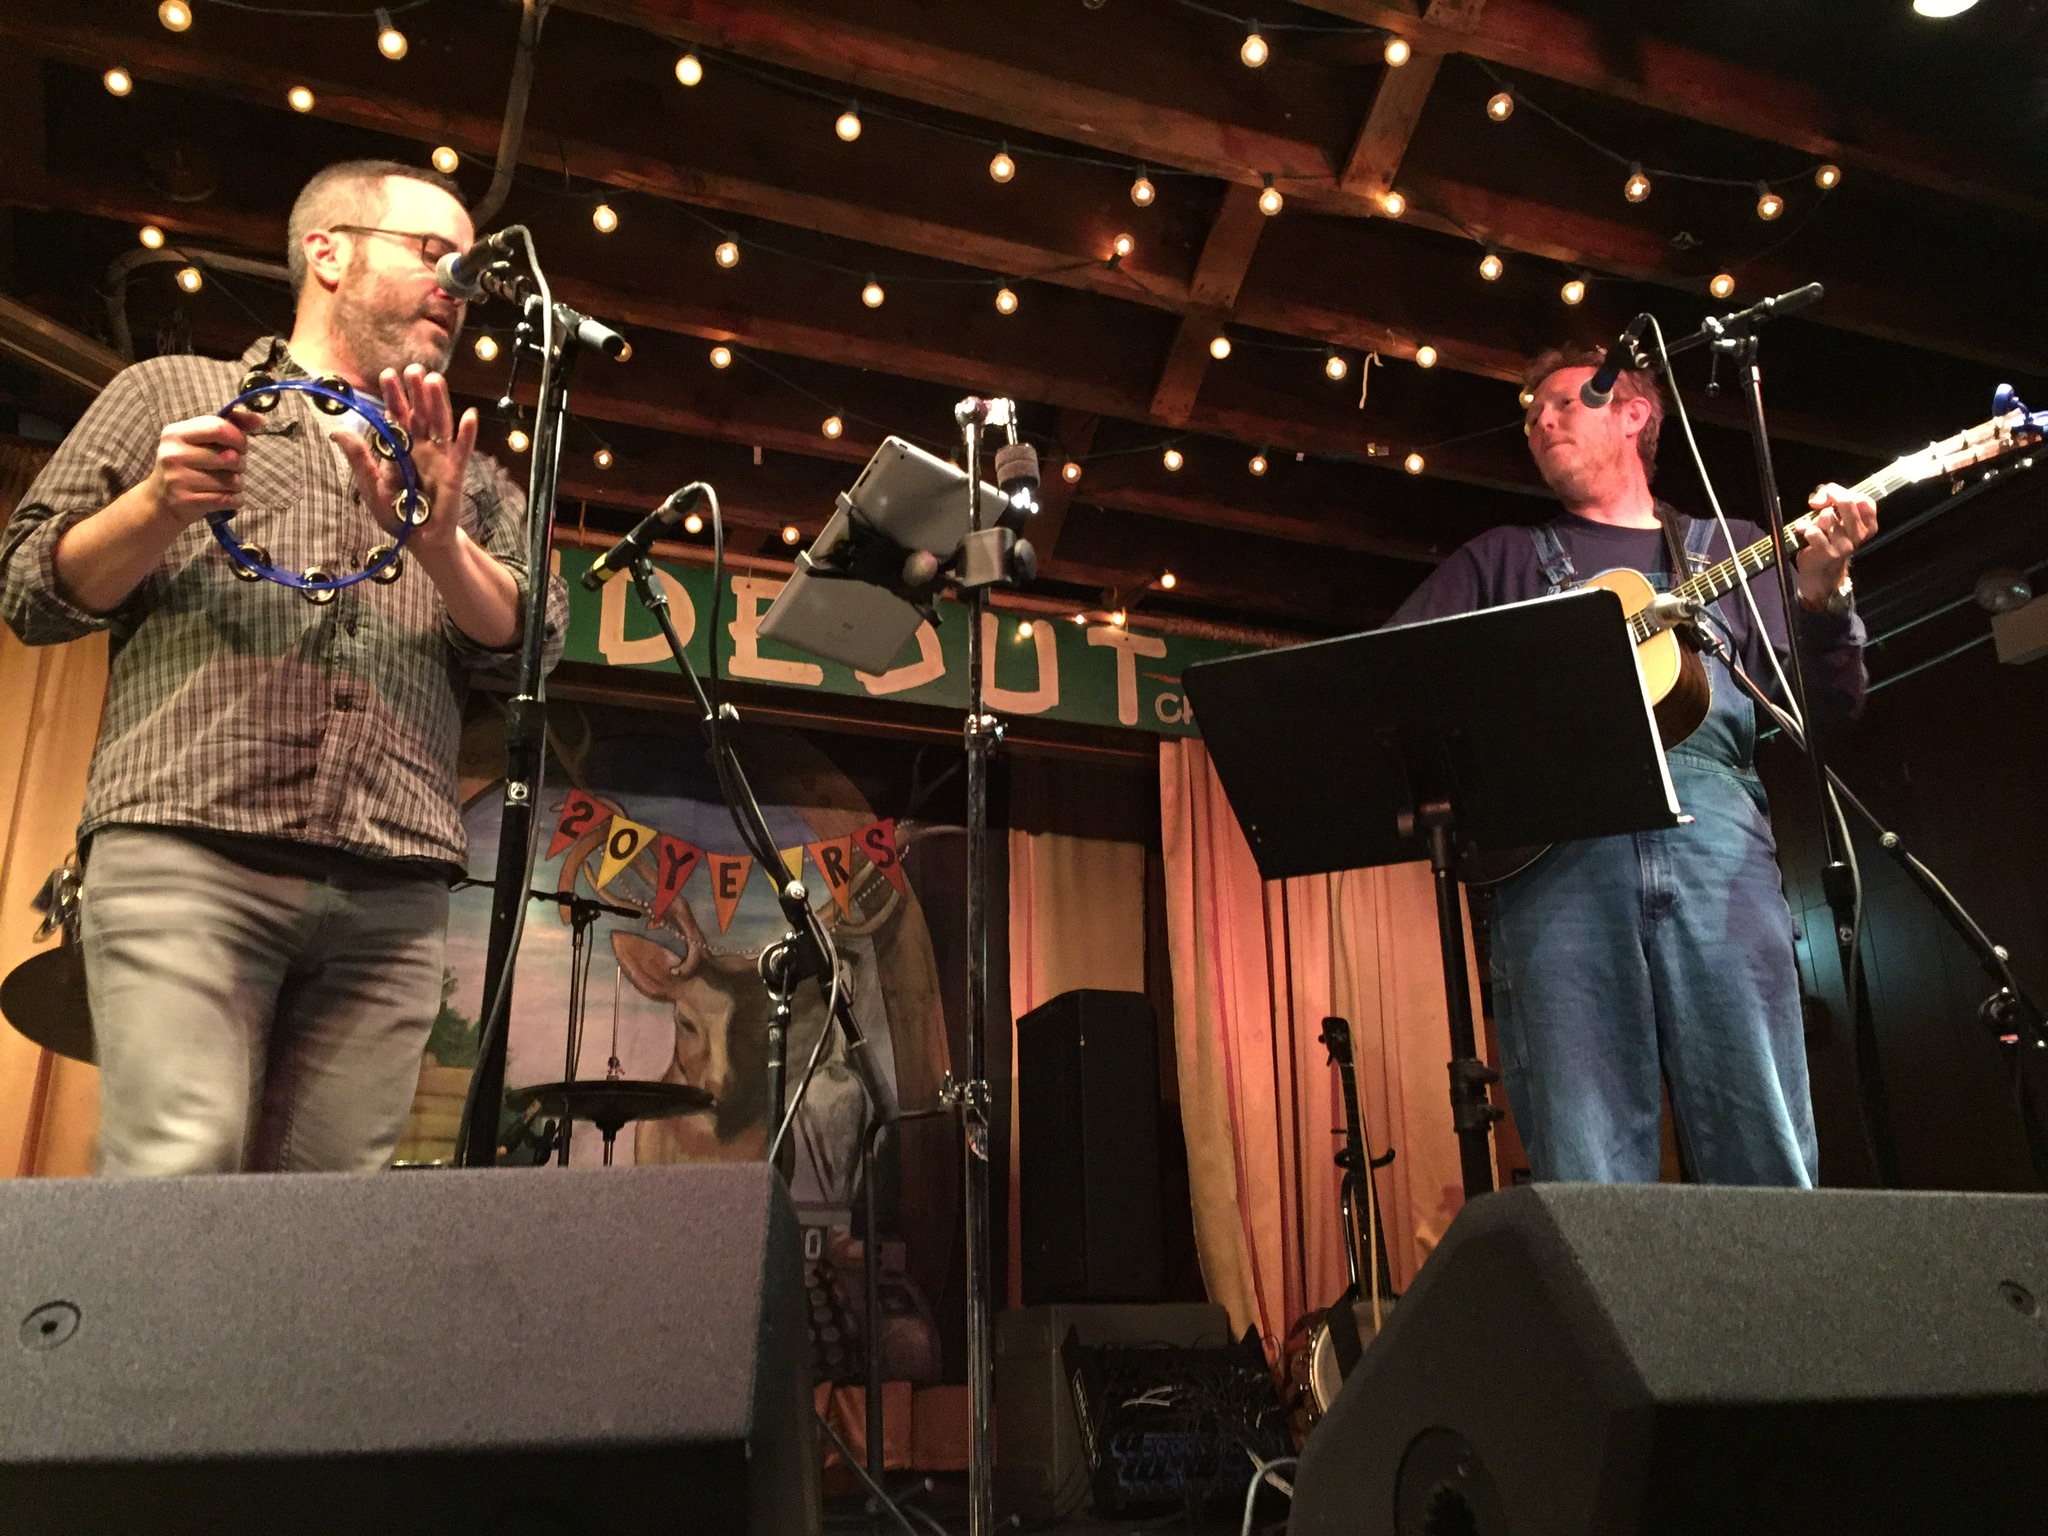 Gerald Dowd (left) and Robbie Fulks  singing "Try Leaving" during their show at the Hideout.  Photo taken by and the property of FourWalls.